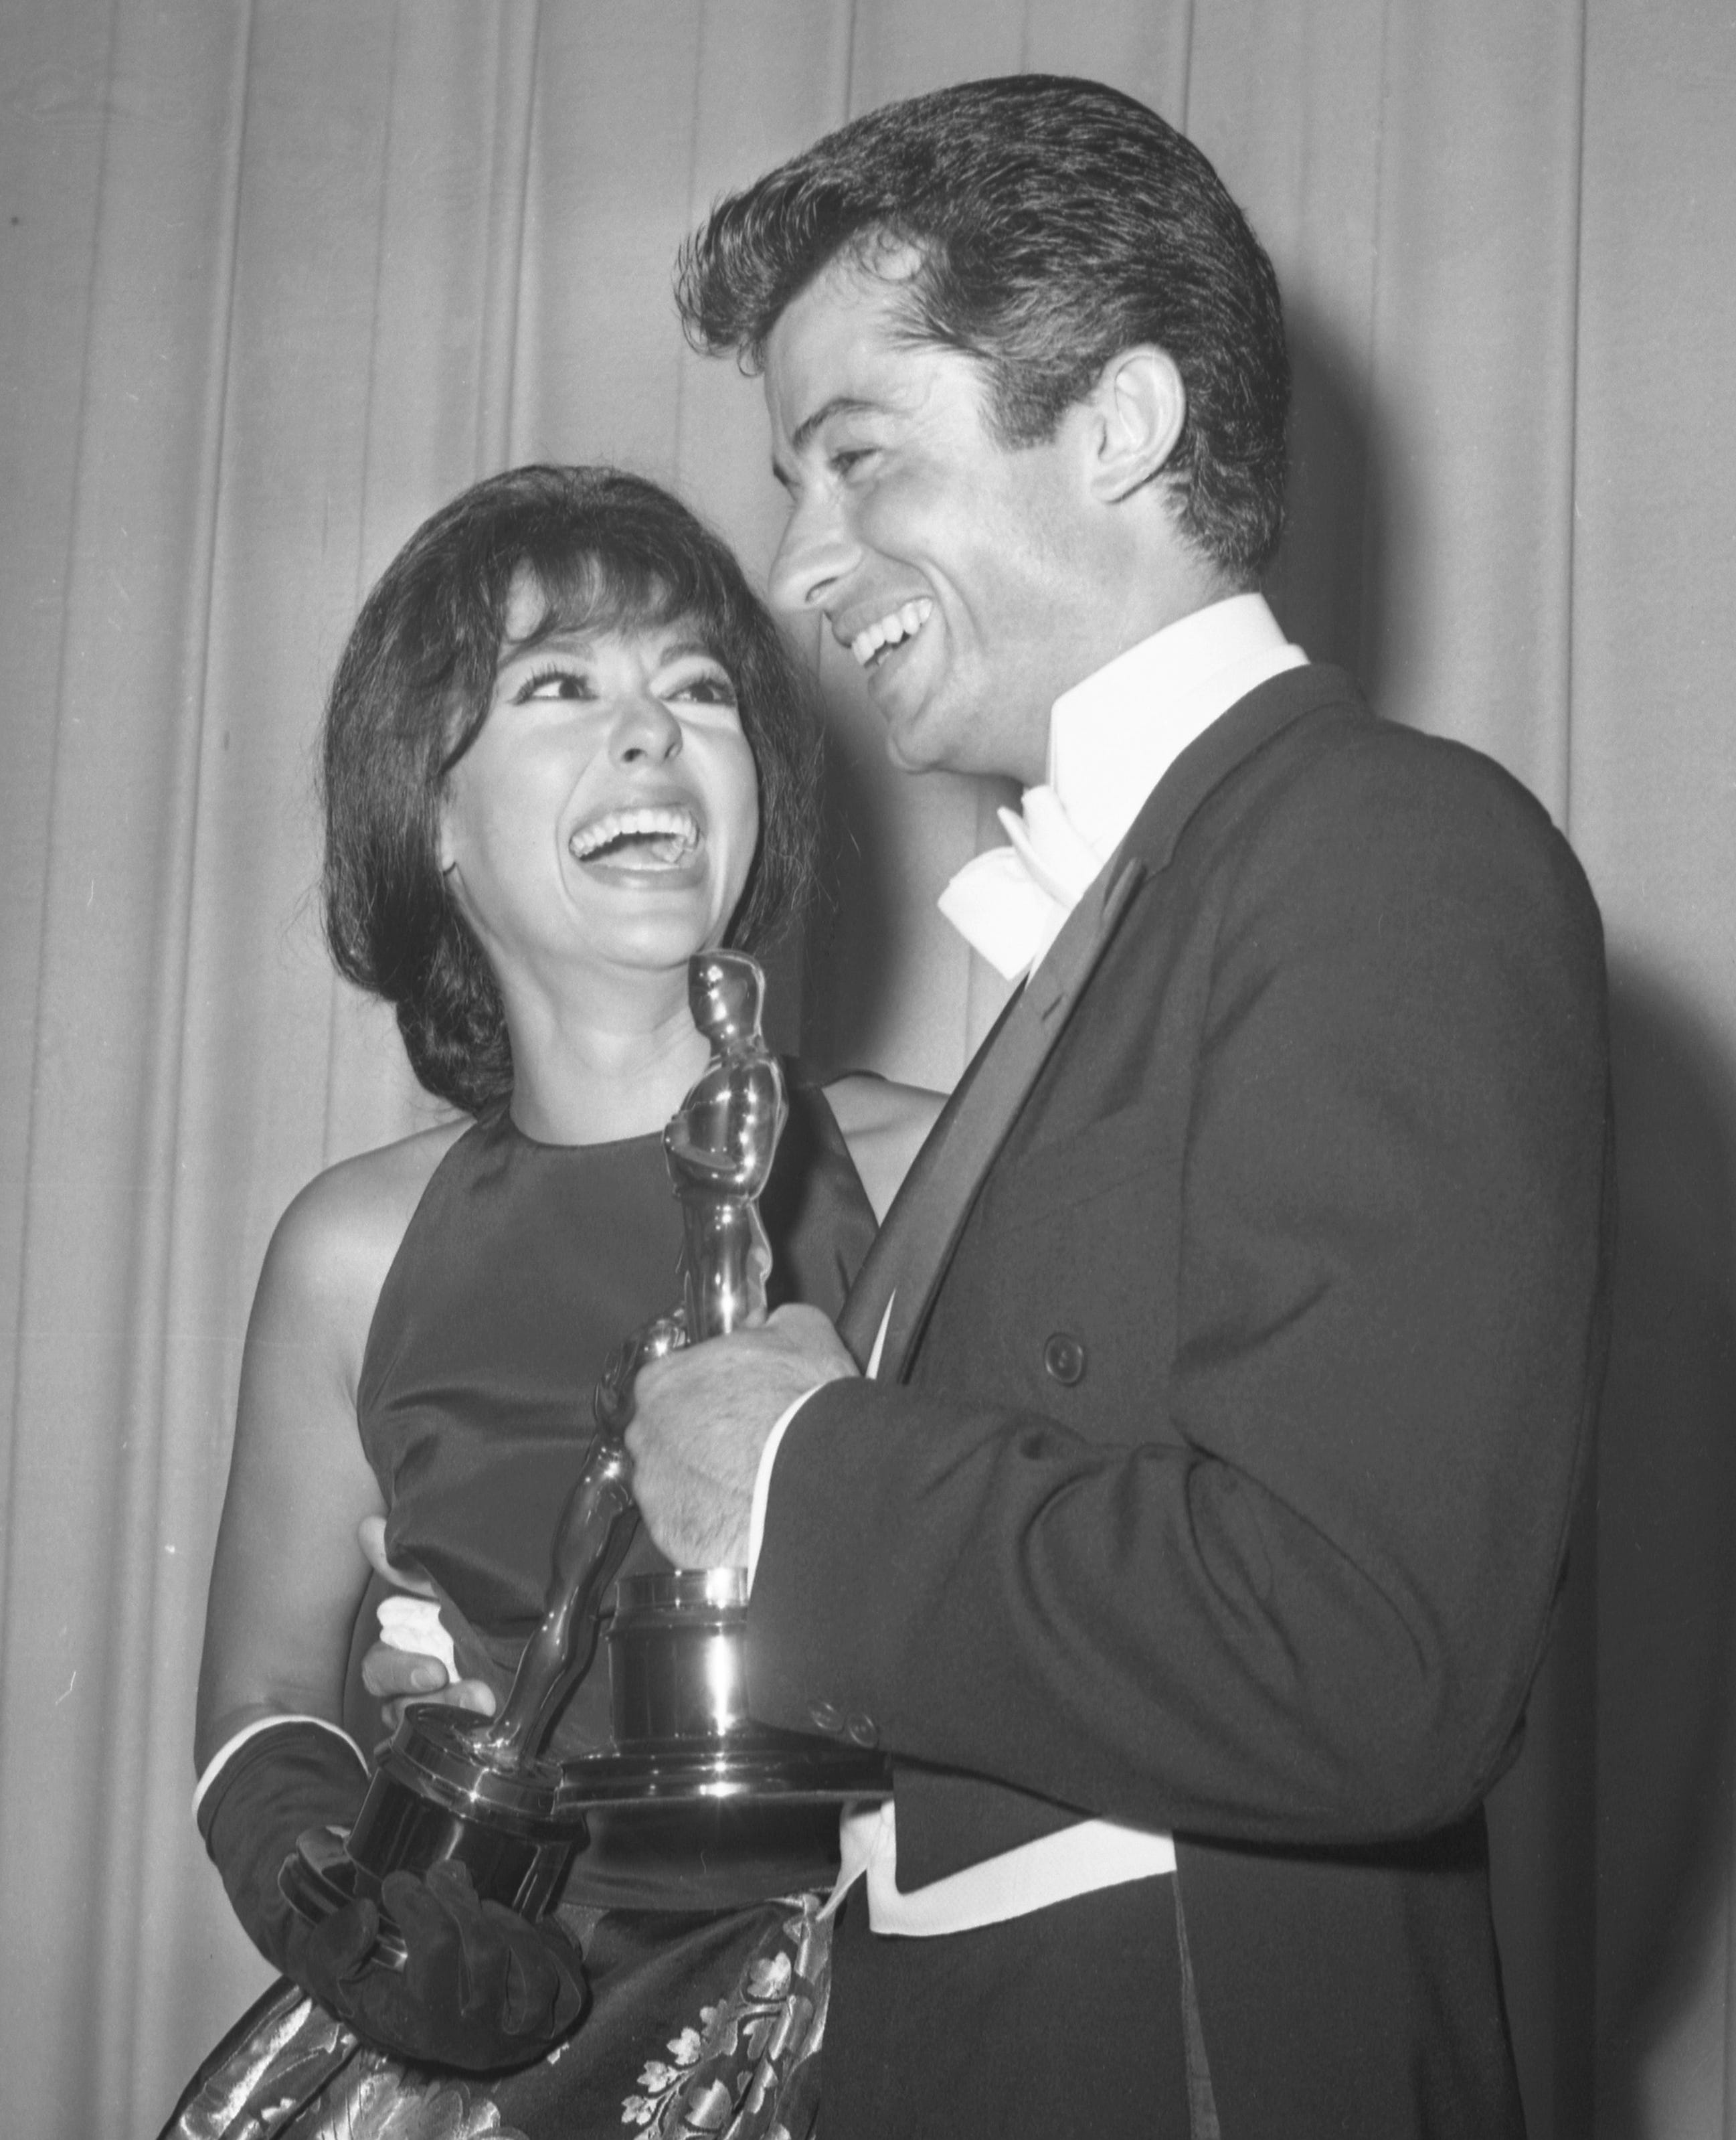 Rita Moreno won the Oscar for best supporting actress for her role in "West Side Story" in 1962. Co-star George Chakiris took home best supporting actor.